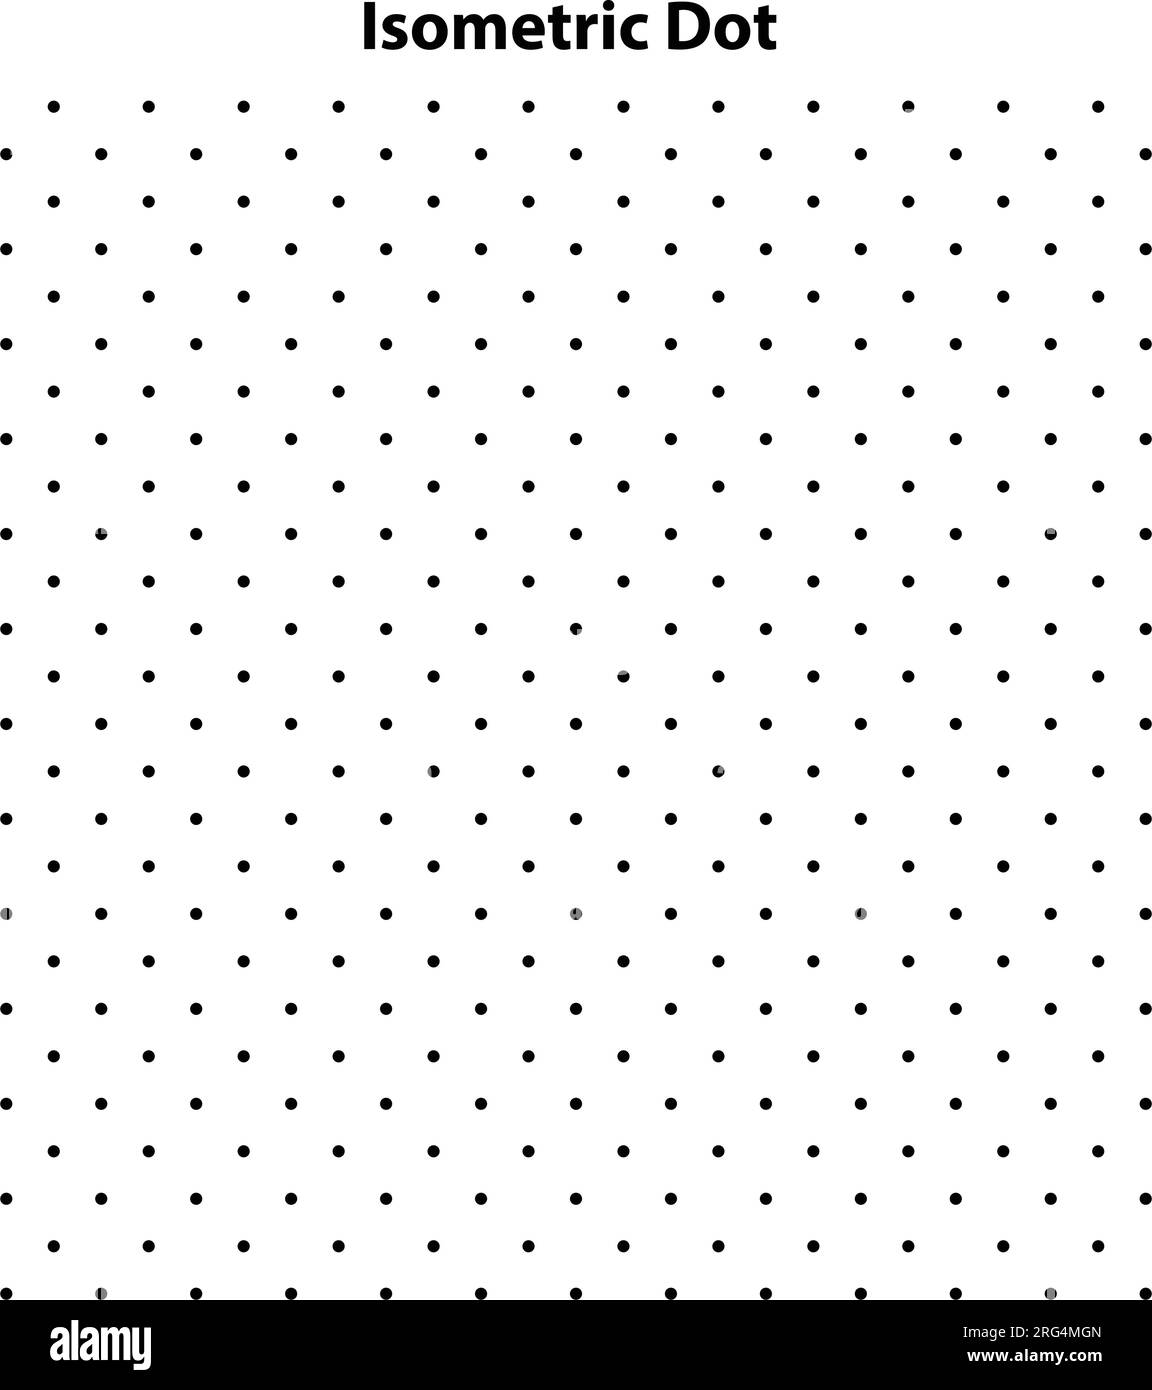 Dot grid vector paper graph paper on white background. isometric